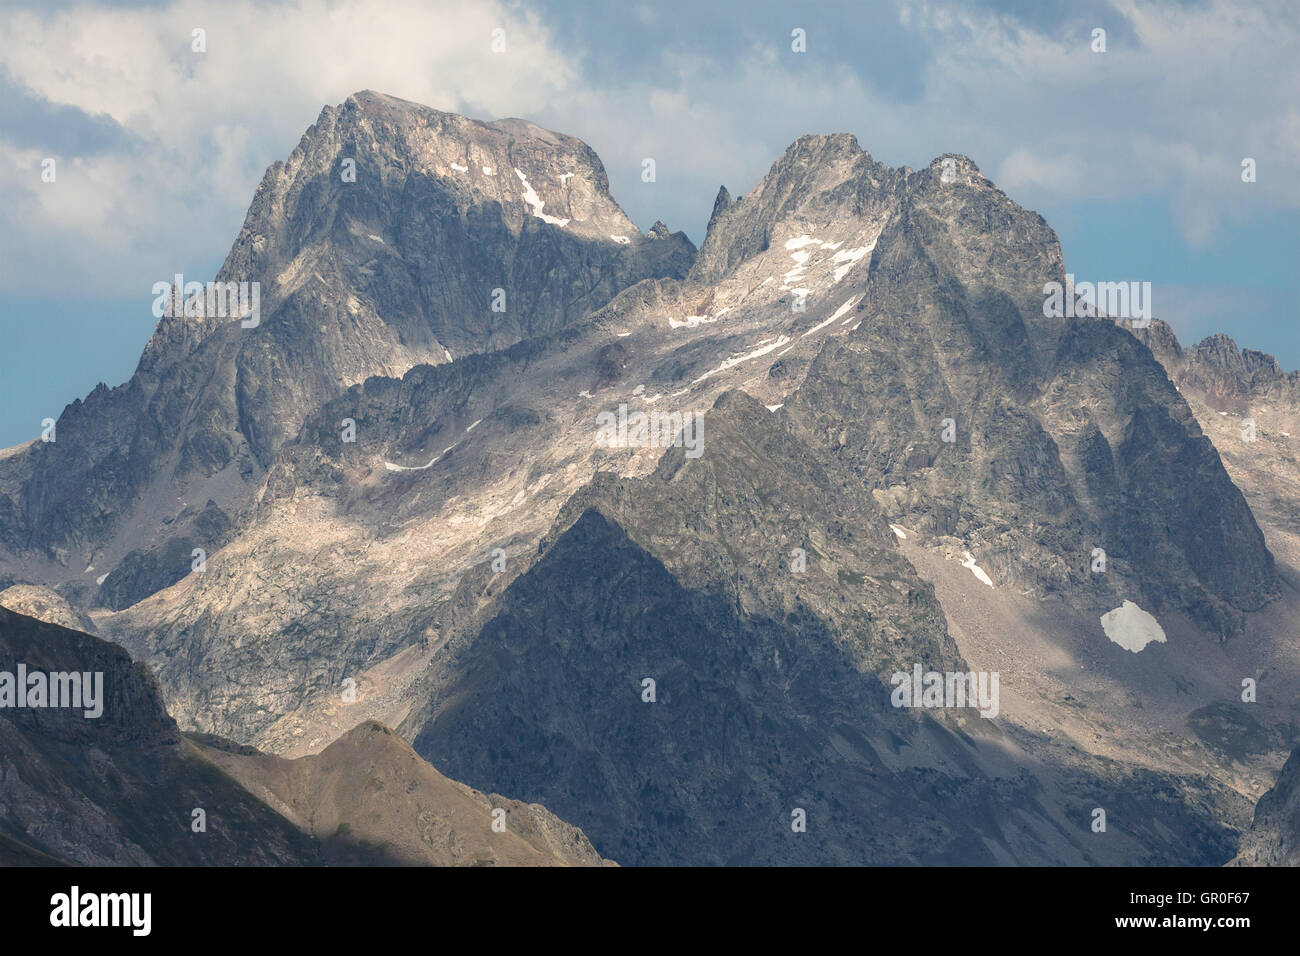 The Balaitous, massif of the Pyrenees located just on the border between Spain and France. Stock Photo